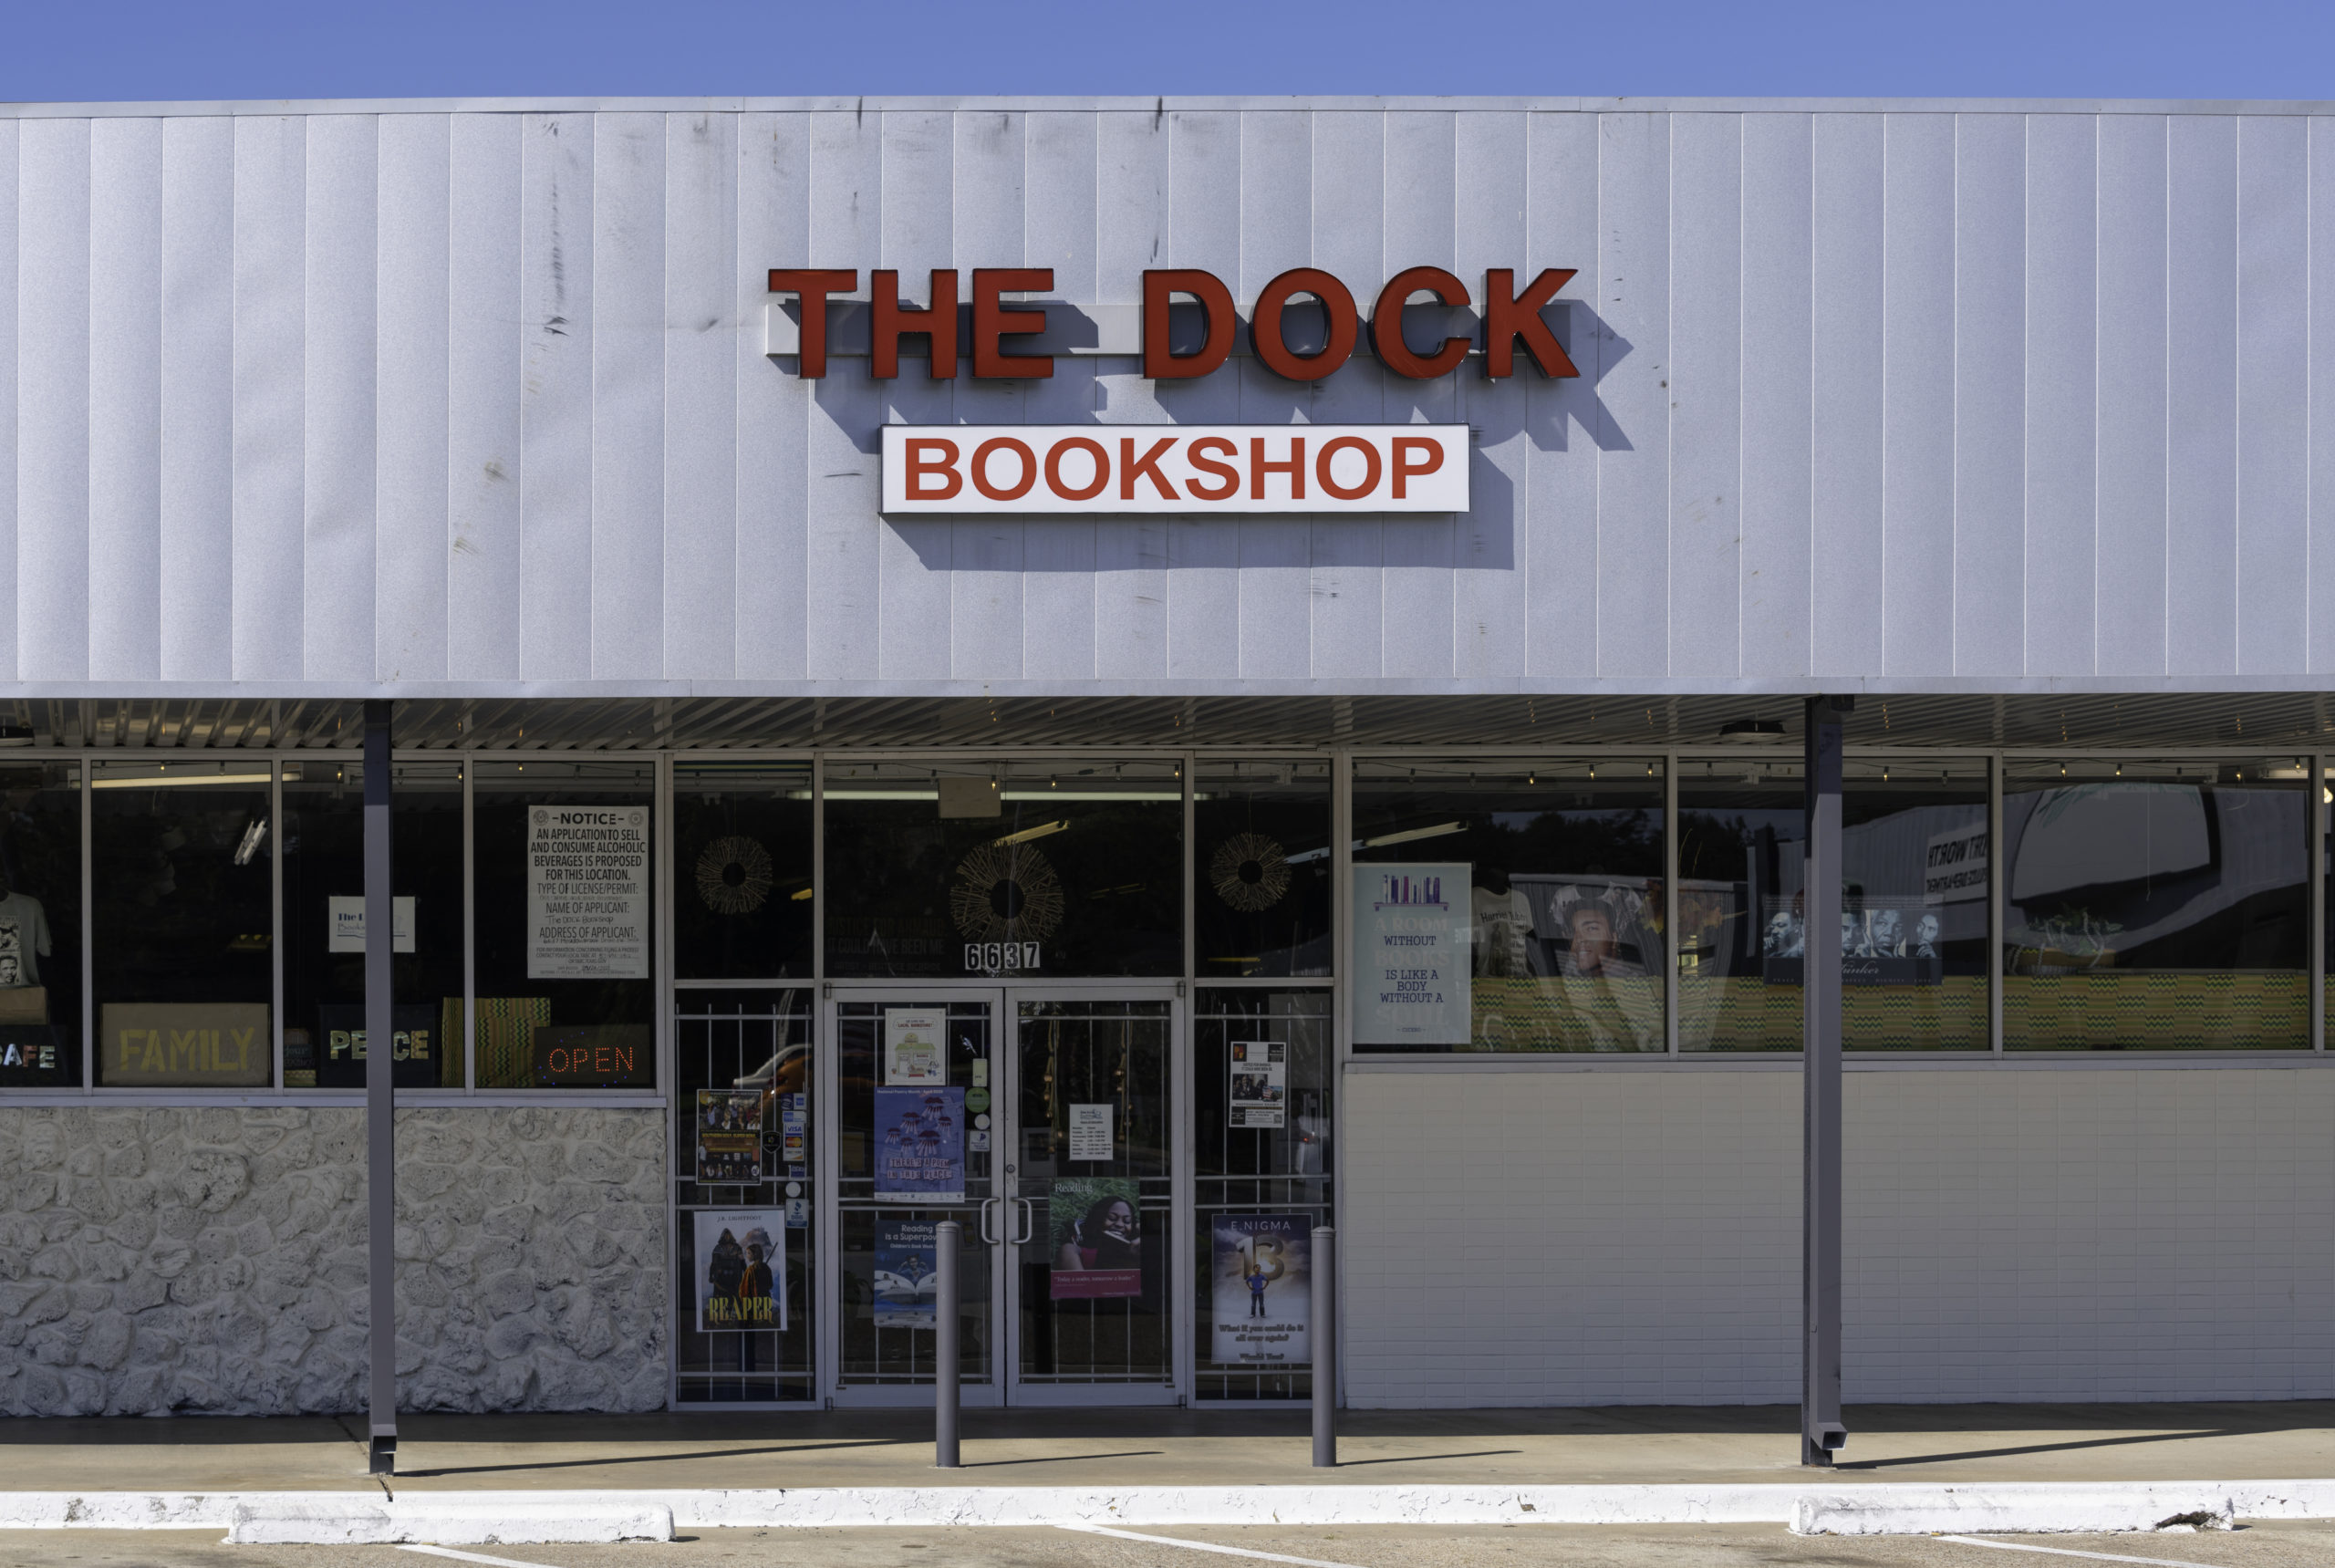 The Dock Bookshop is a strip mall-style store with welcoming signs in the windows with words like "safe," "family" and "peace."